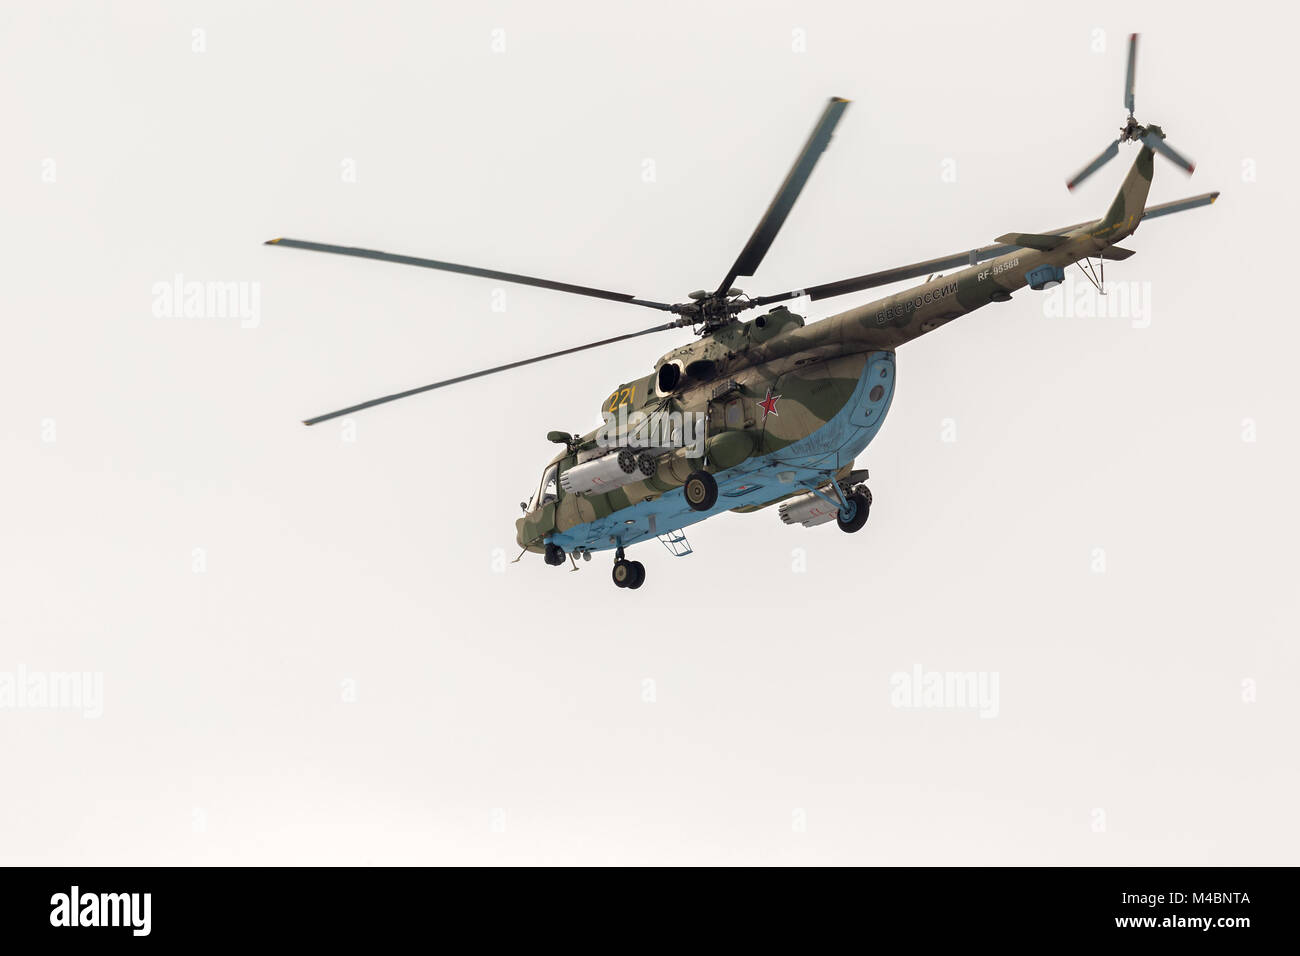 Mi-8 helicopter participant Airshow. NATO reporting name: Hip Stock Photo